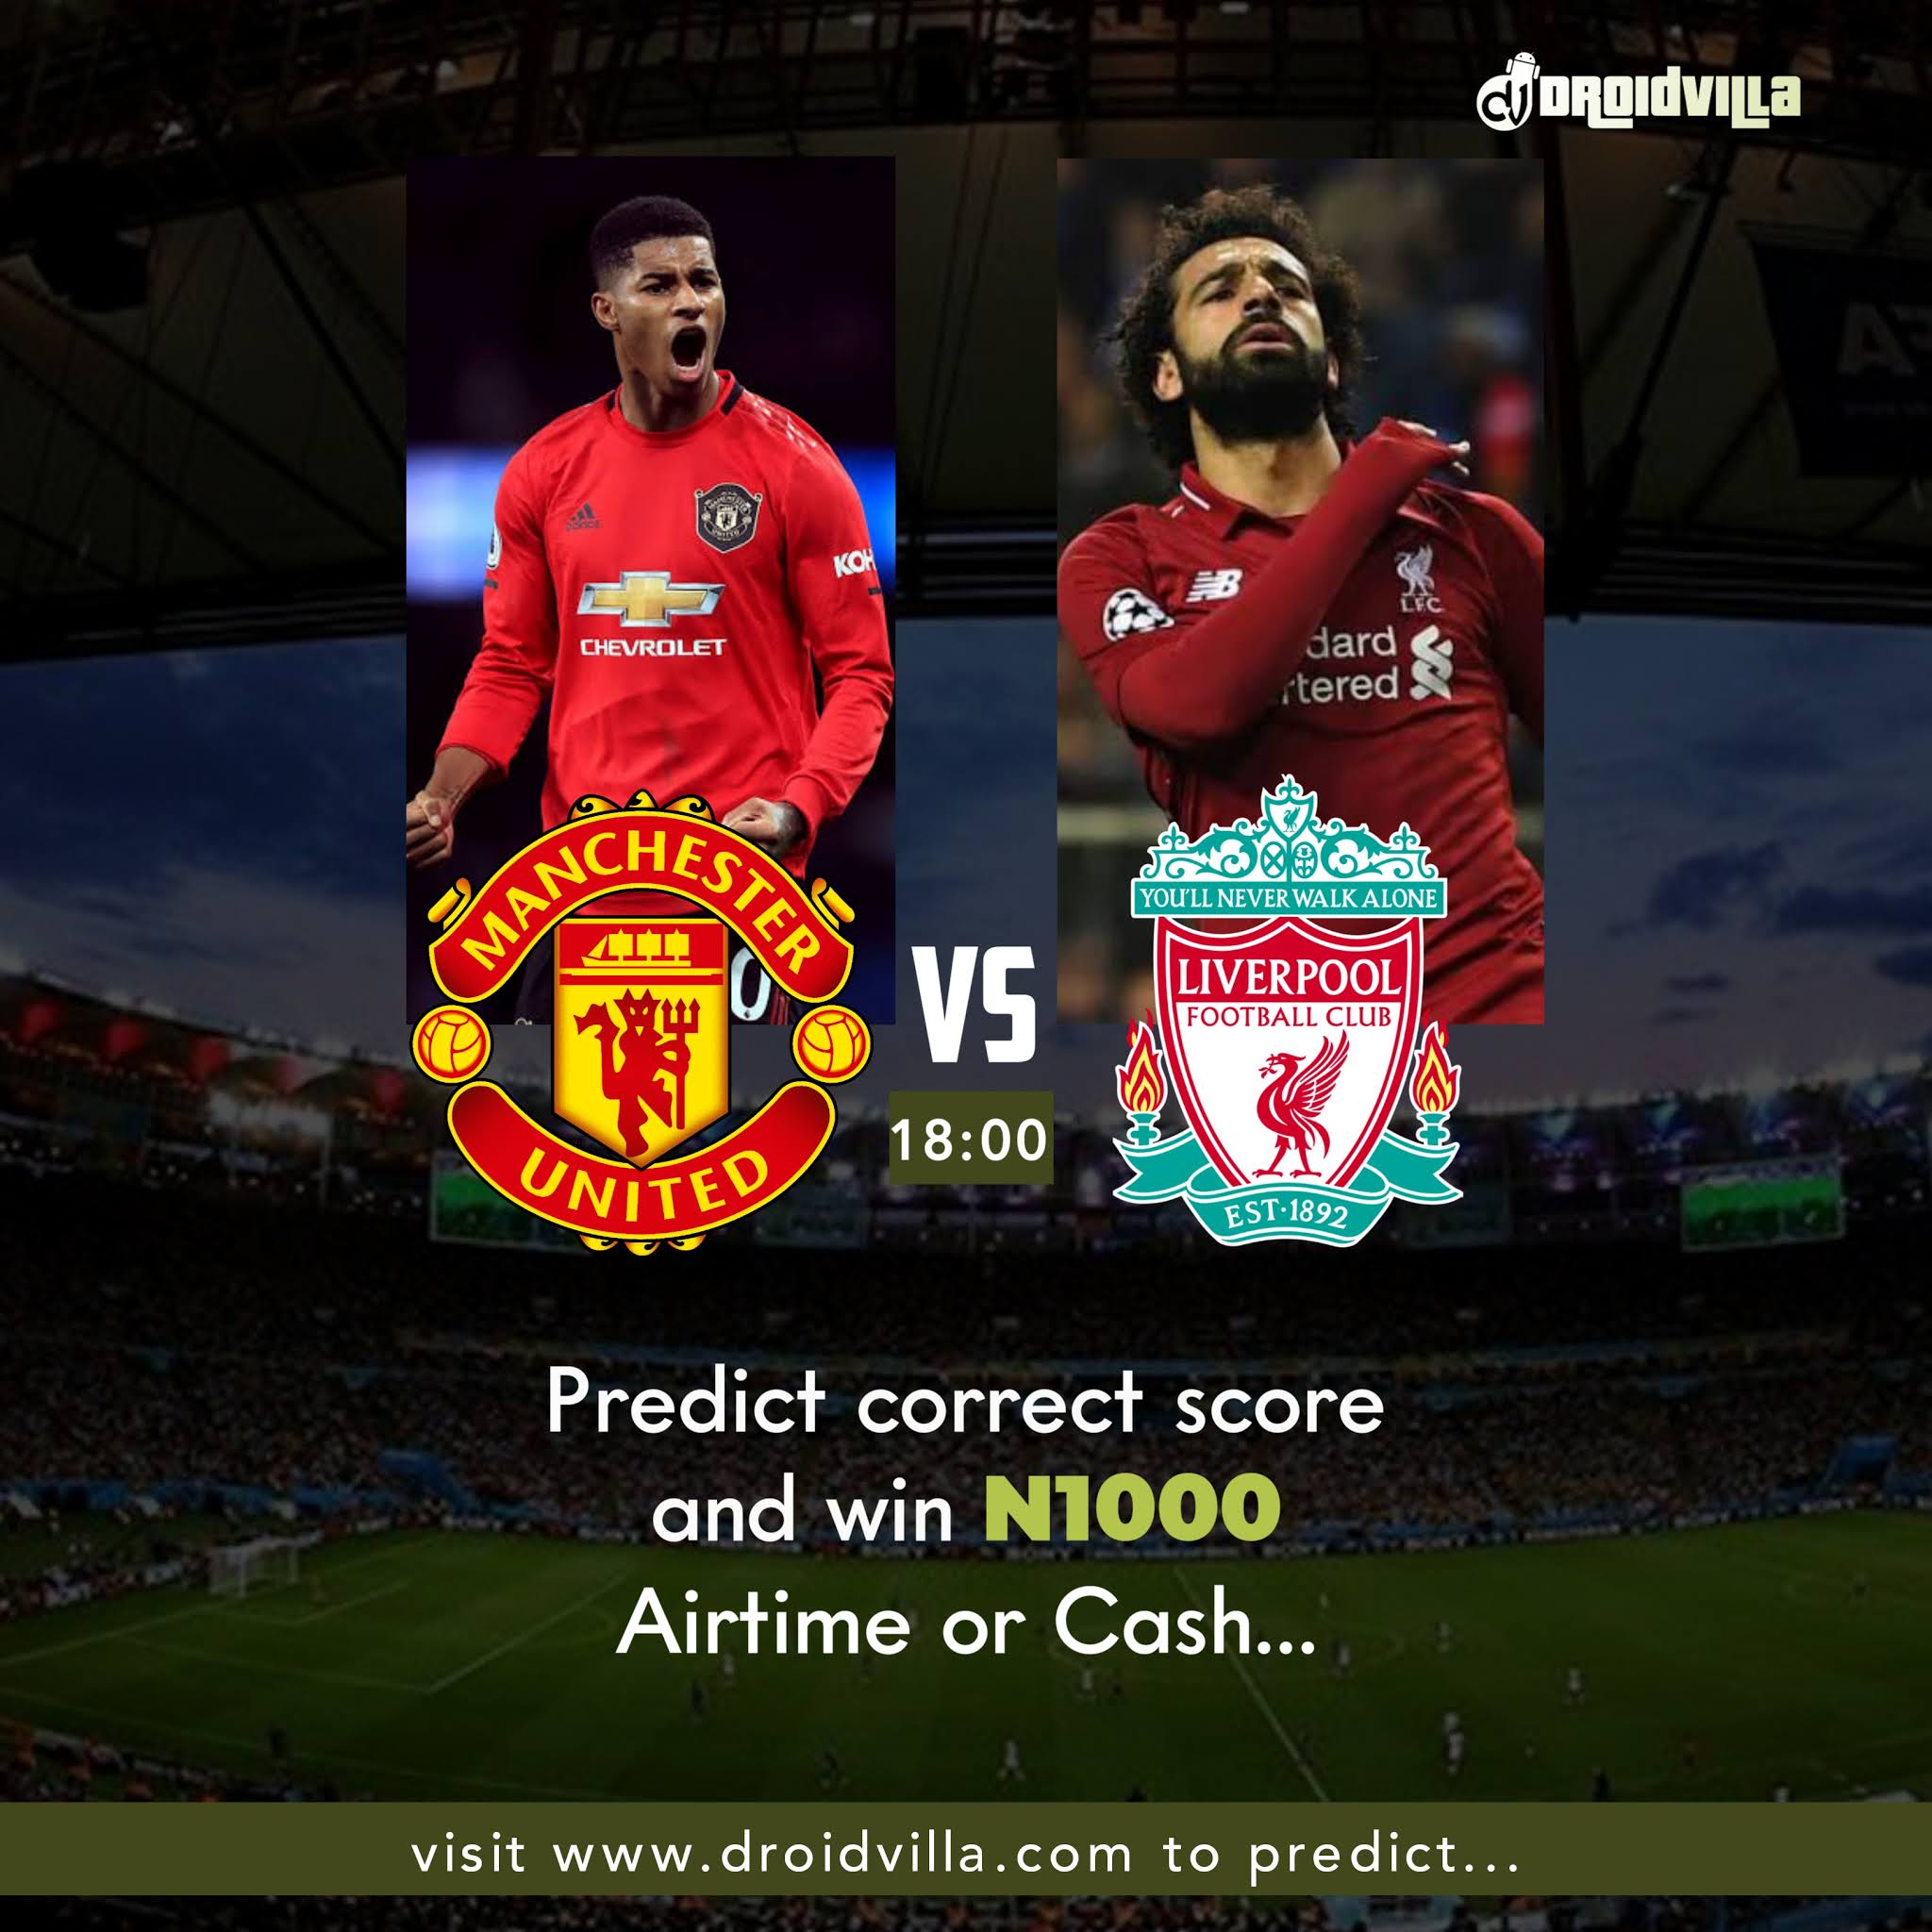 predict-man-u-vs-liverpool-correct-score-and-win-n1000-airtime-or-cash-droidvilla-technology-solution-android-apk-phone-reviews-technology-updates-tipstricks